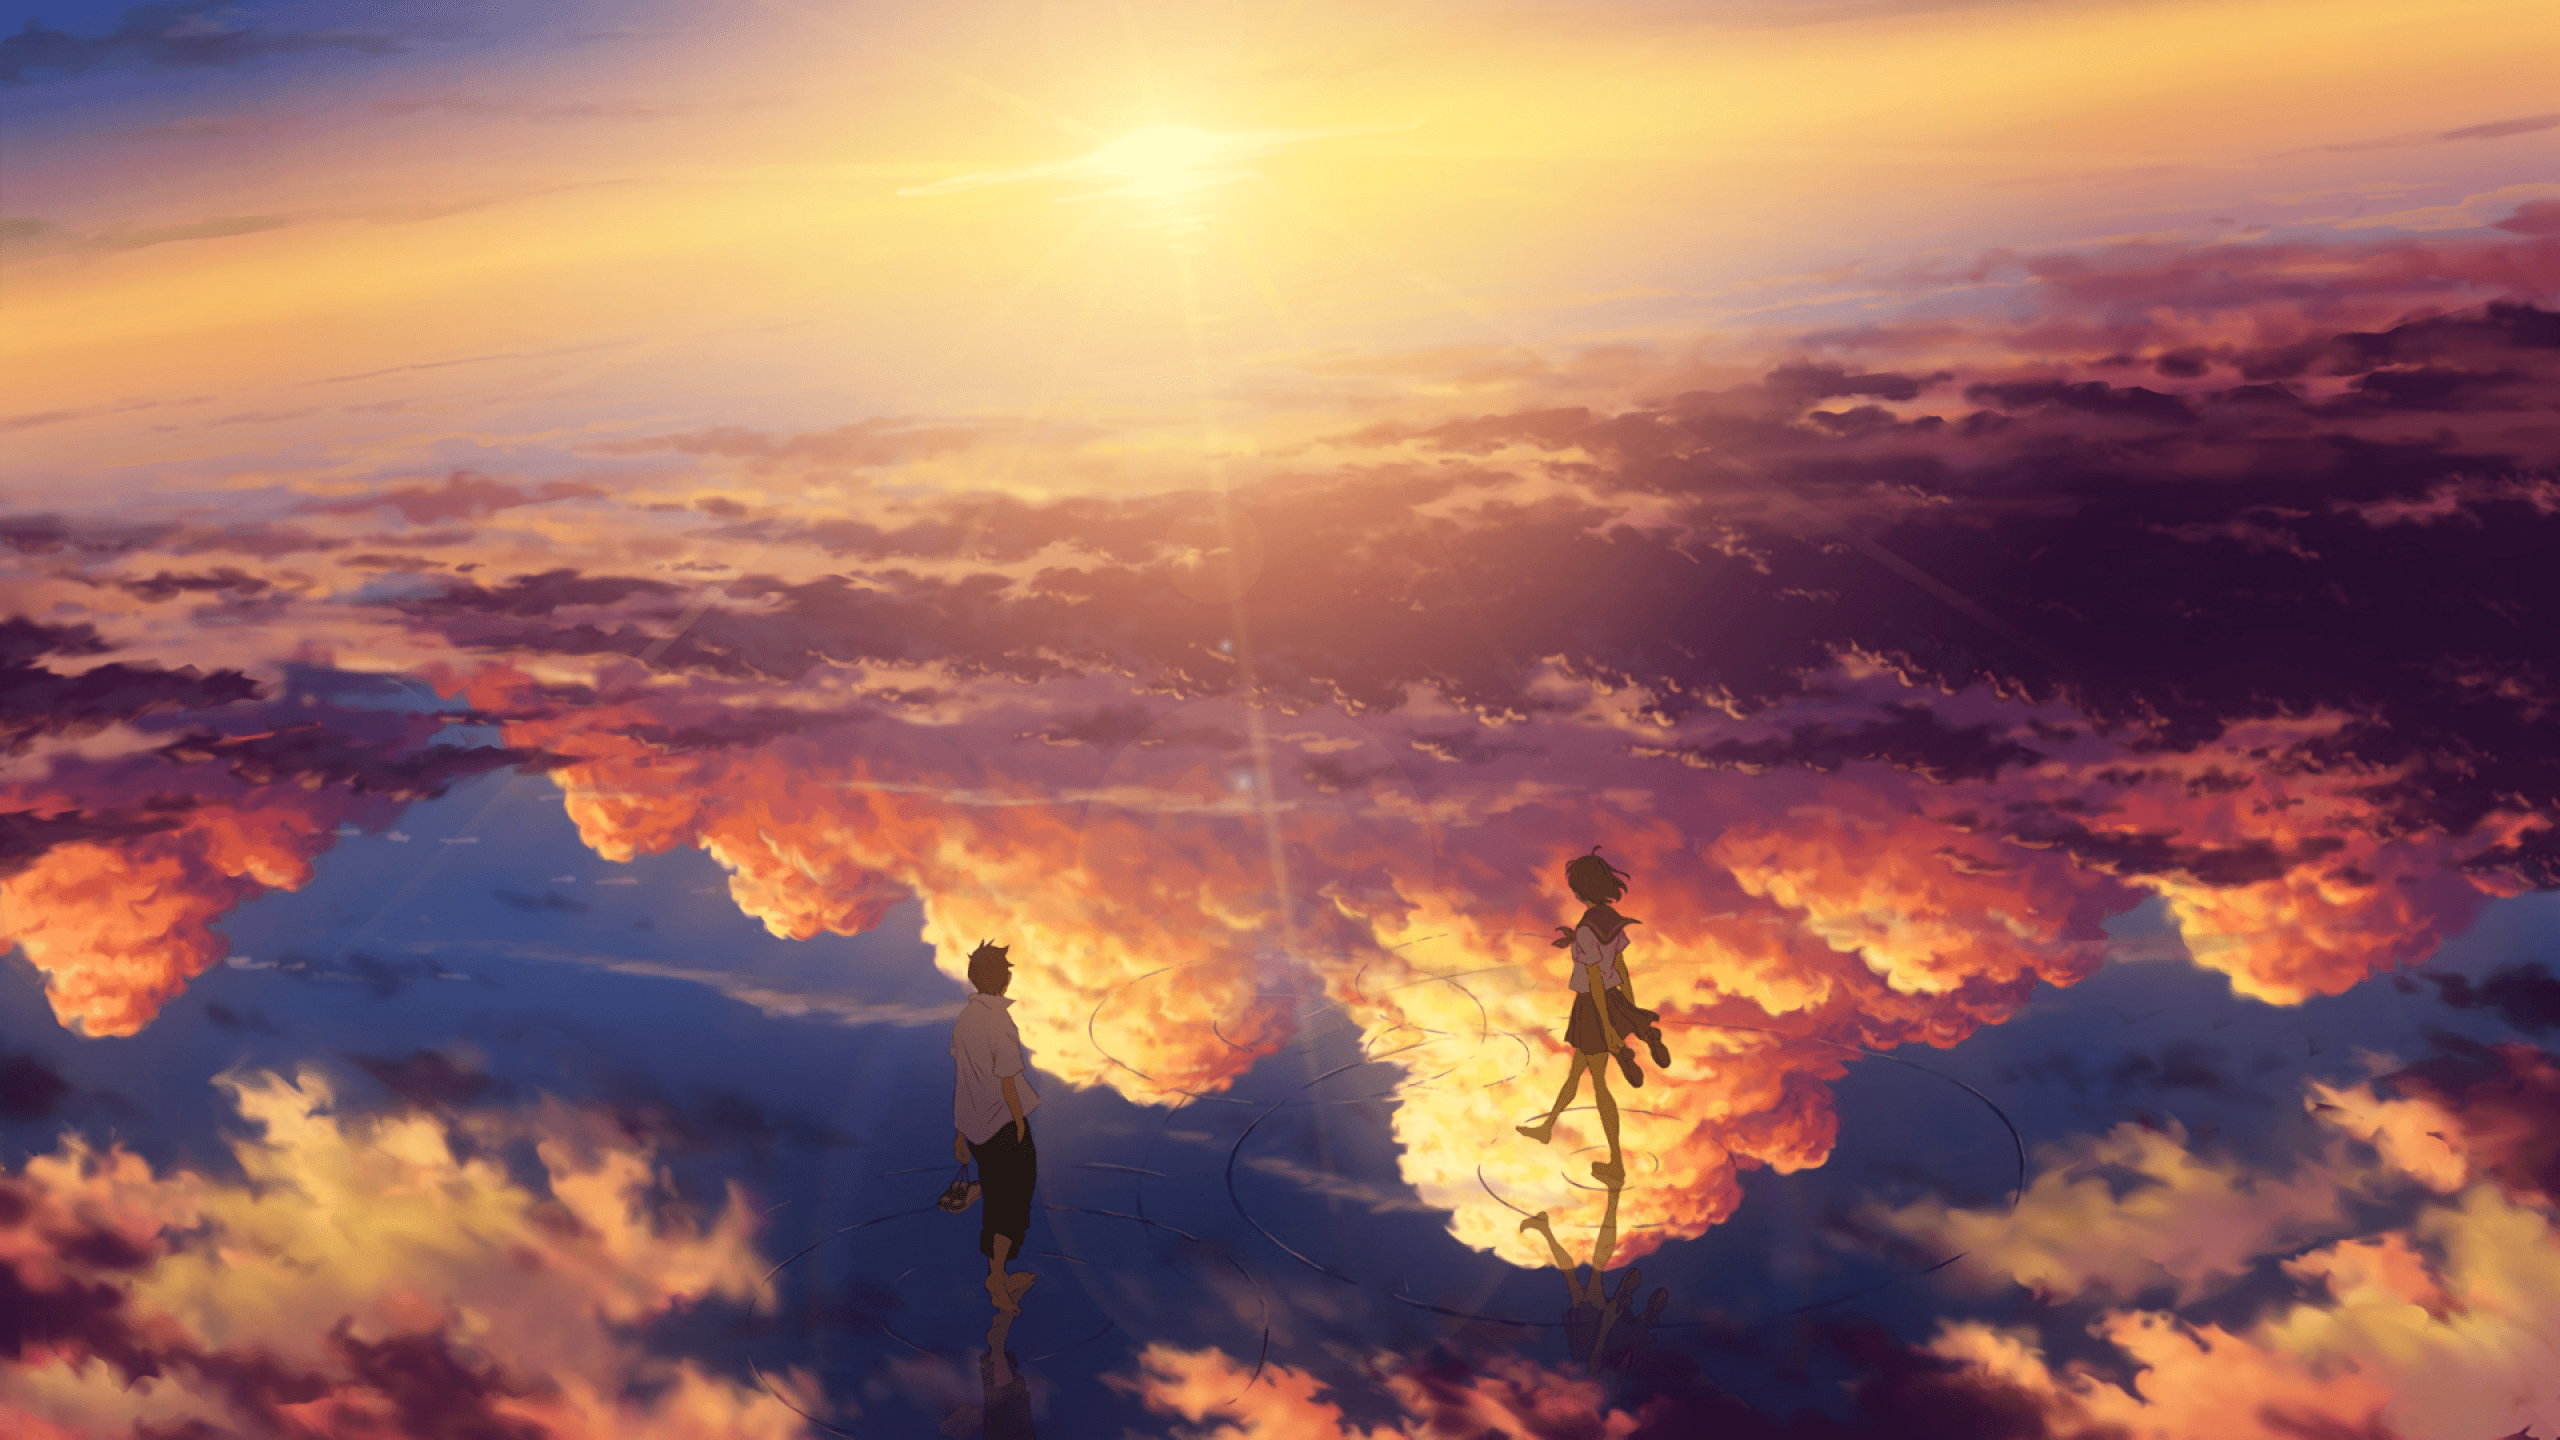 Download 2560x1440 Anime Landscape, Beyond The Clouds, Sunset